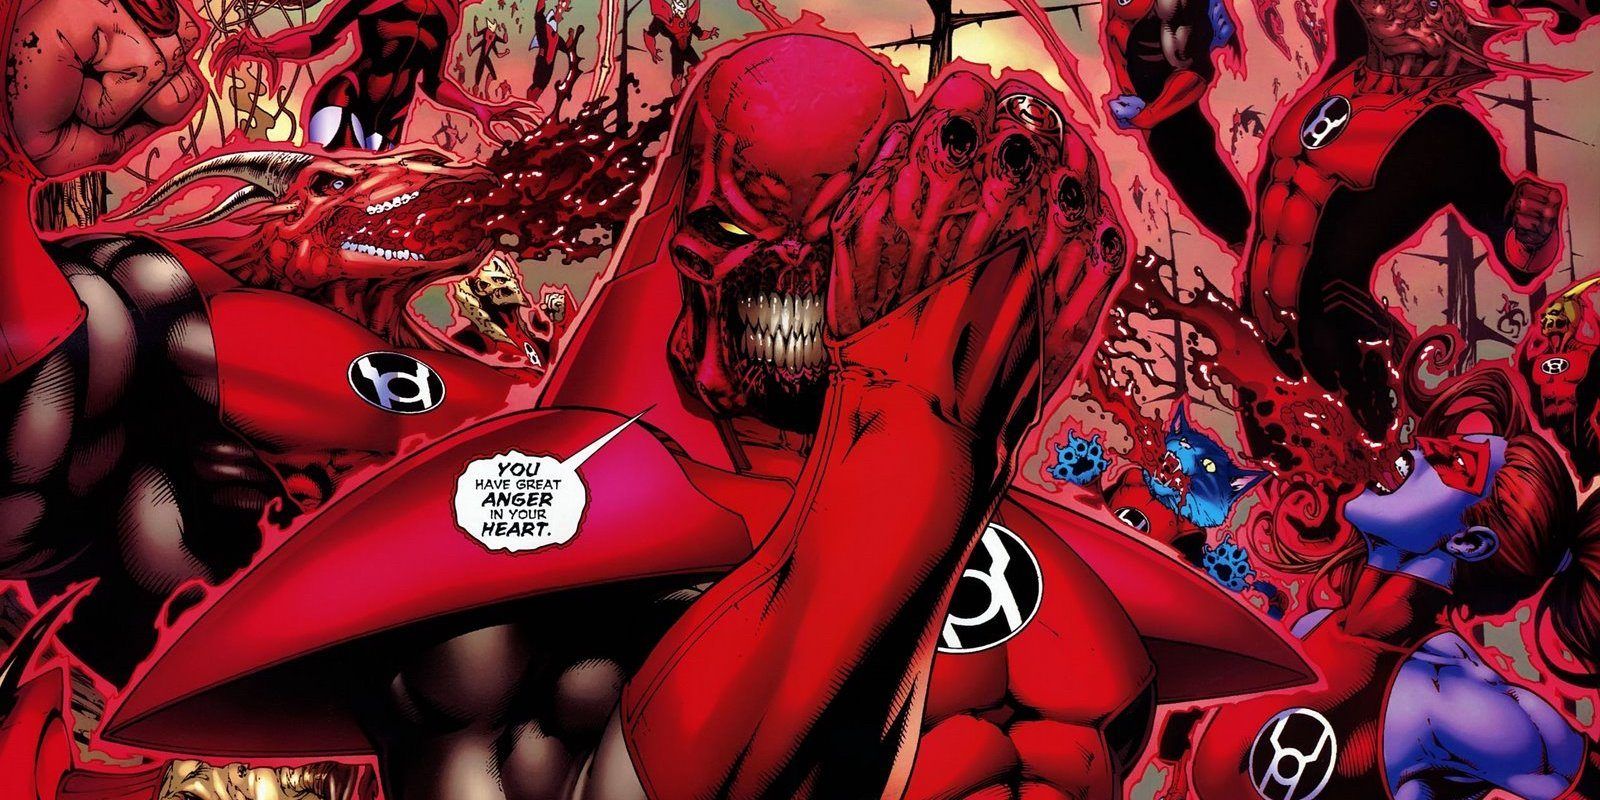 The Red Lantern Corps leader Atrocitus surrounded by his Red Lanterns in DC Comics